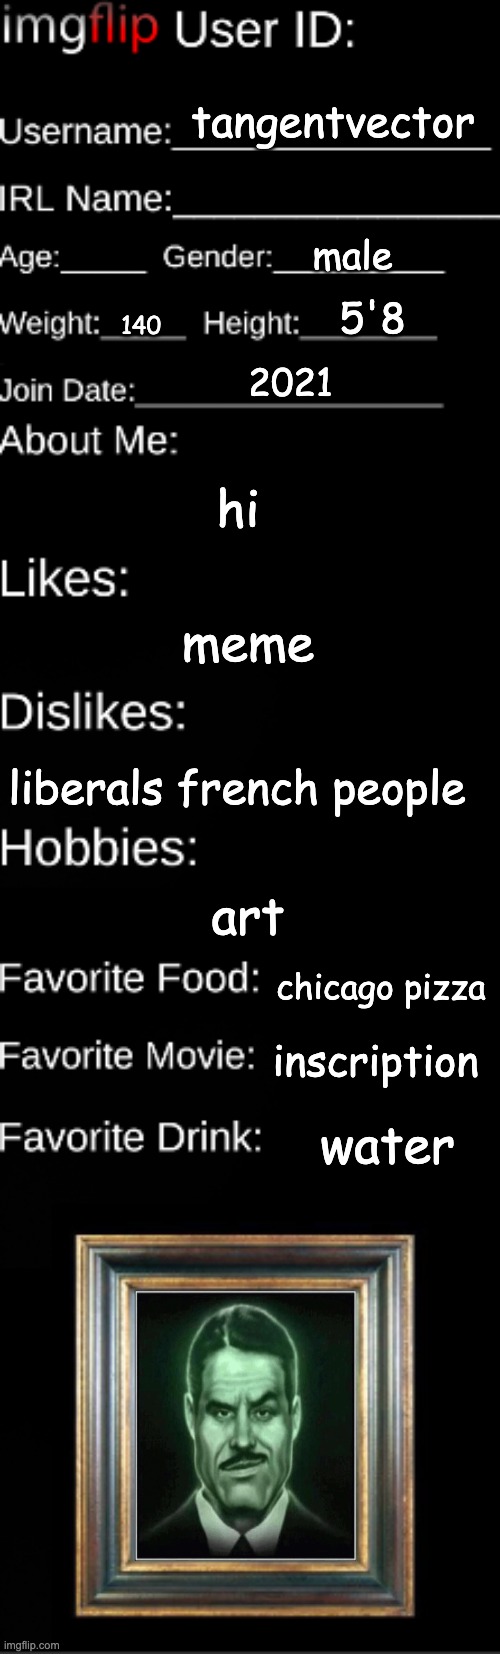 Imgflip user ID | tangentvector; male; 5'8; 140; 2021; hi; meme; liberals french people; art; chicago pizza; inscription; water | image tagged in imgflip user id | made w/ Imgflip meme maker